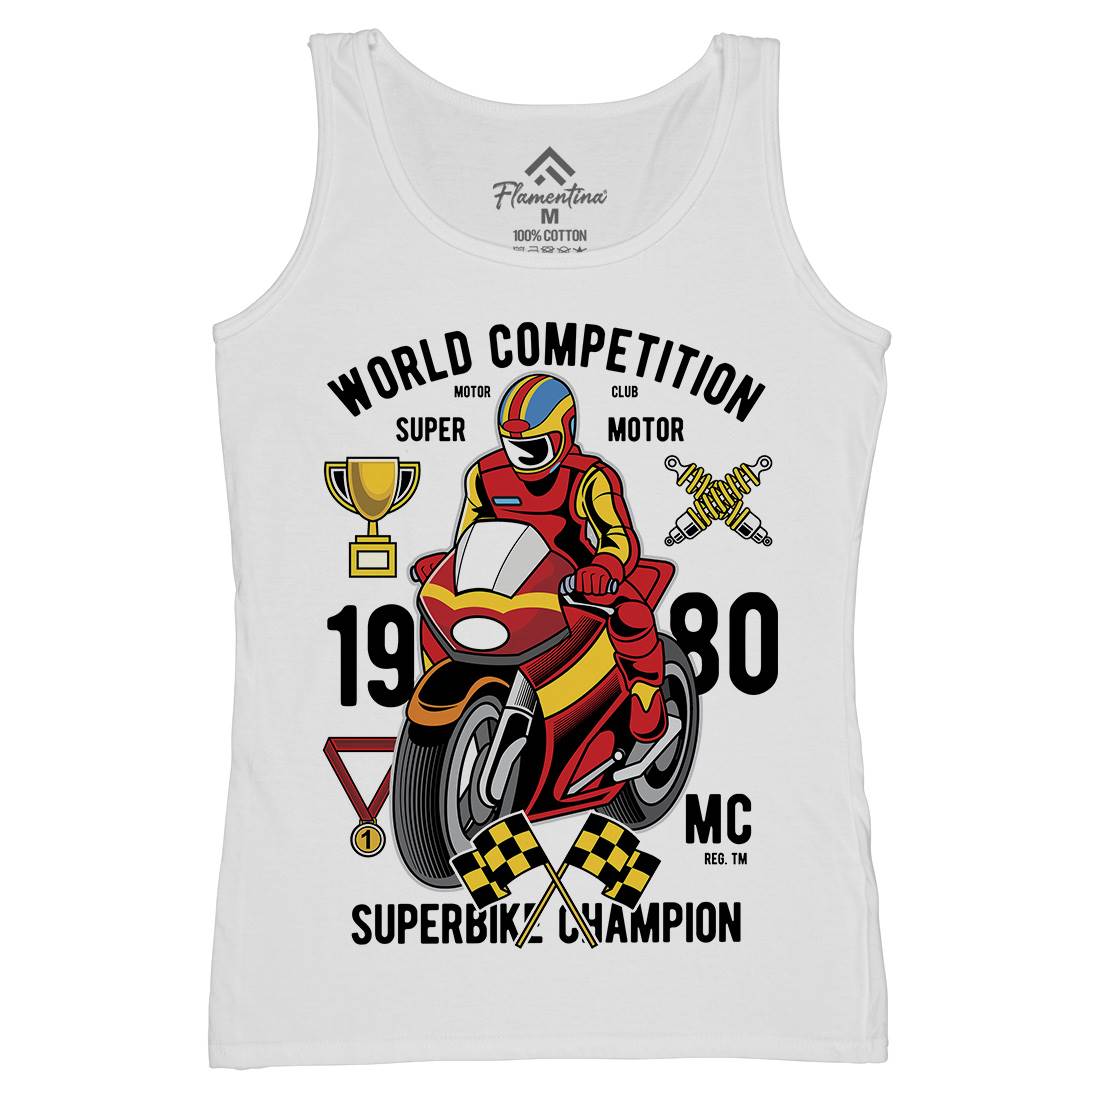 Super Bike World Competition Womens Organic Tank Top Vest Motorcycles C458